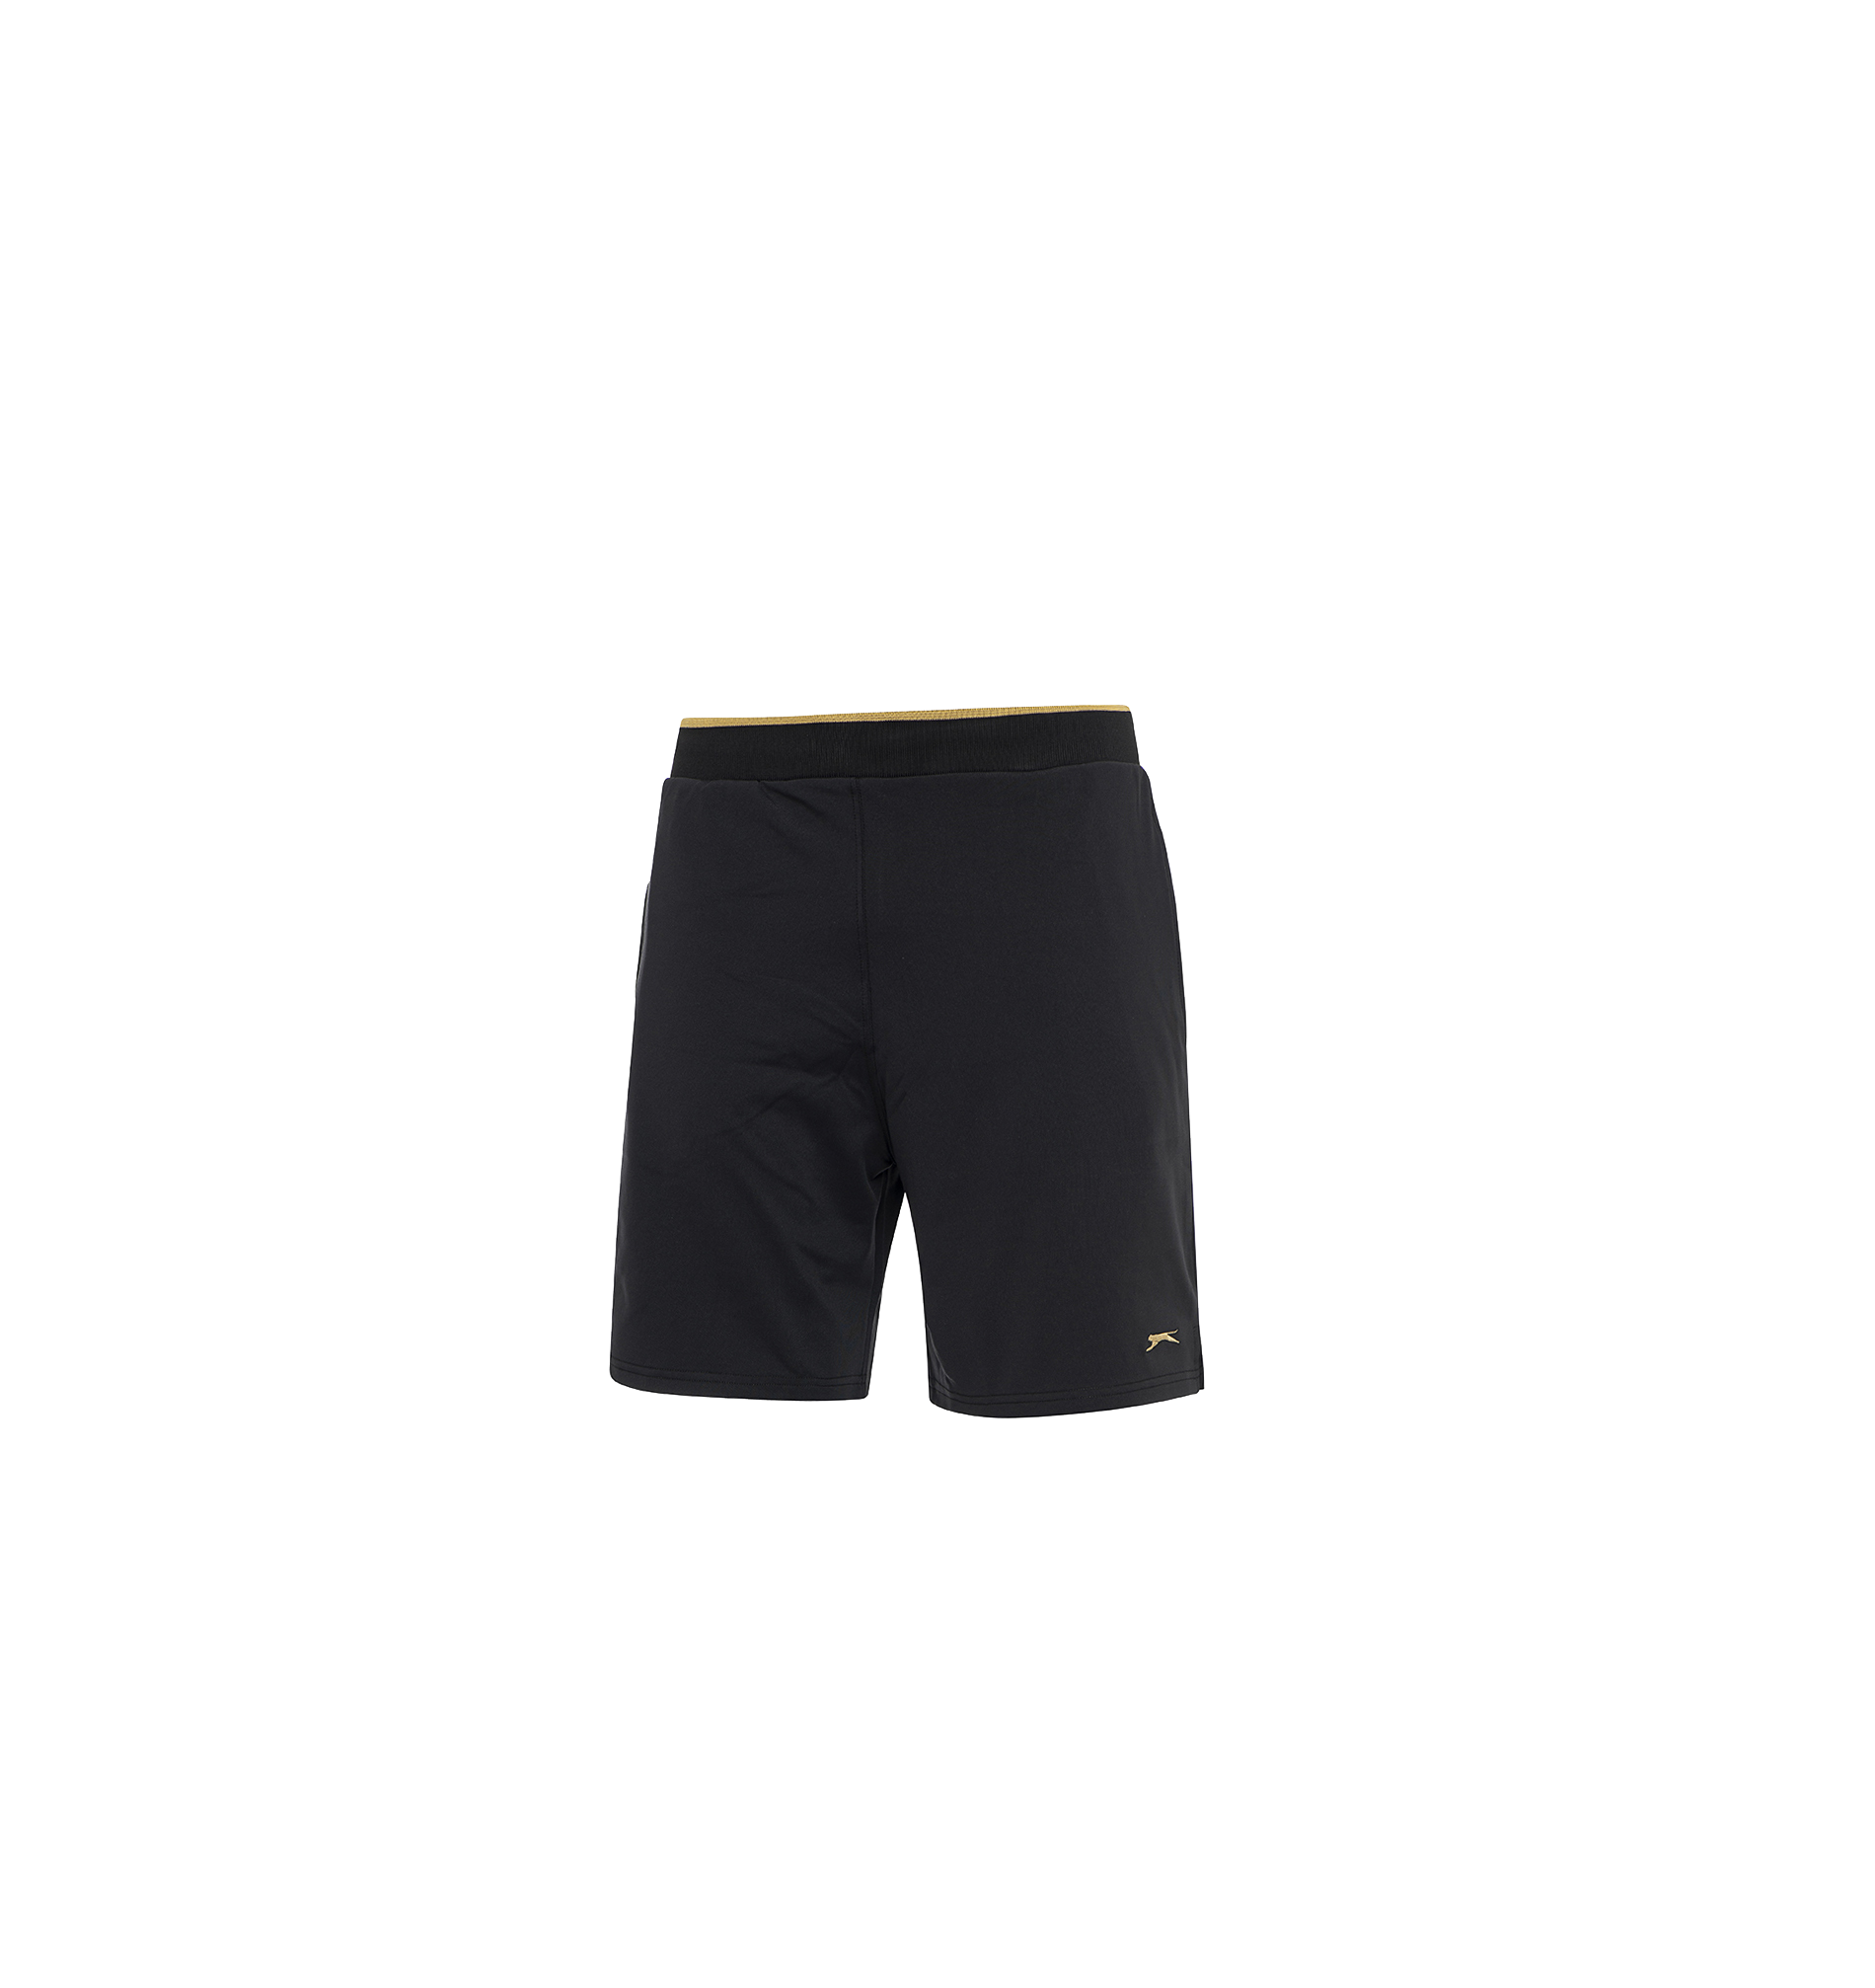 DIEGO TRACK SHORTS - PANTHER BLACK